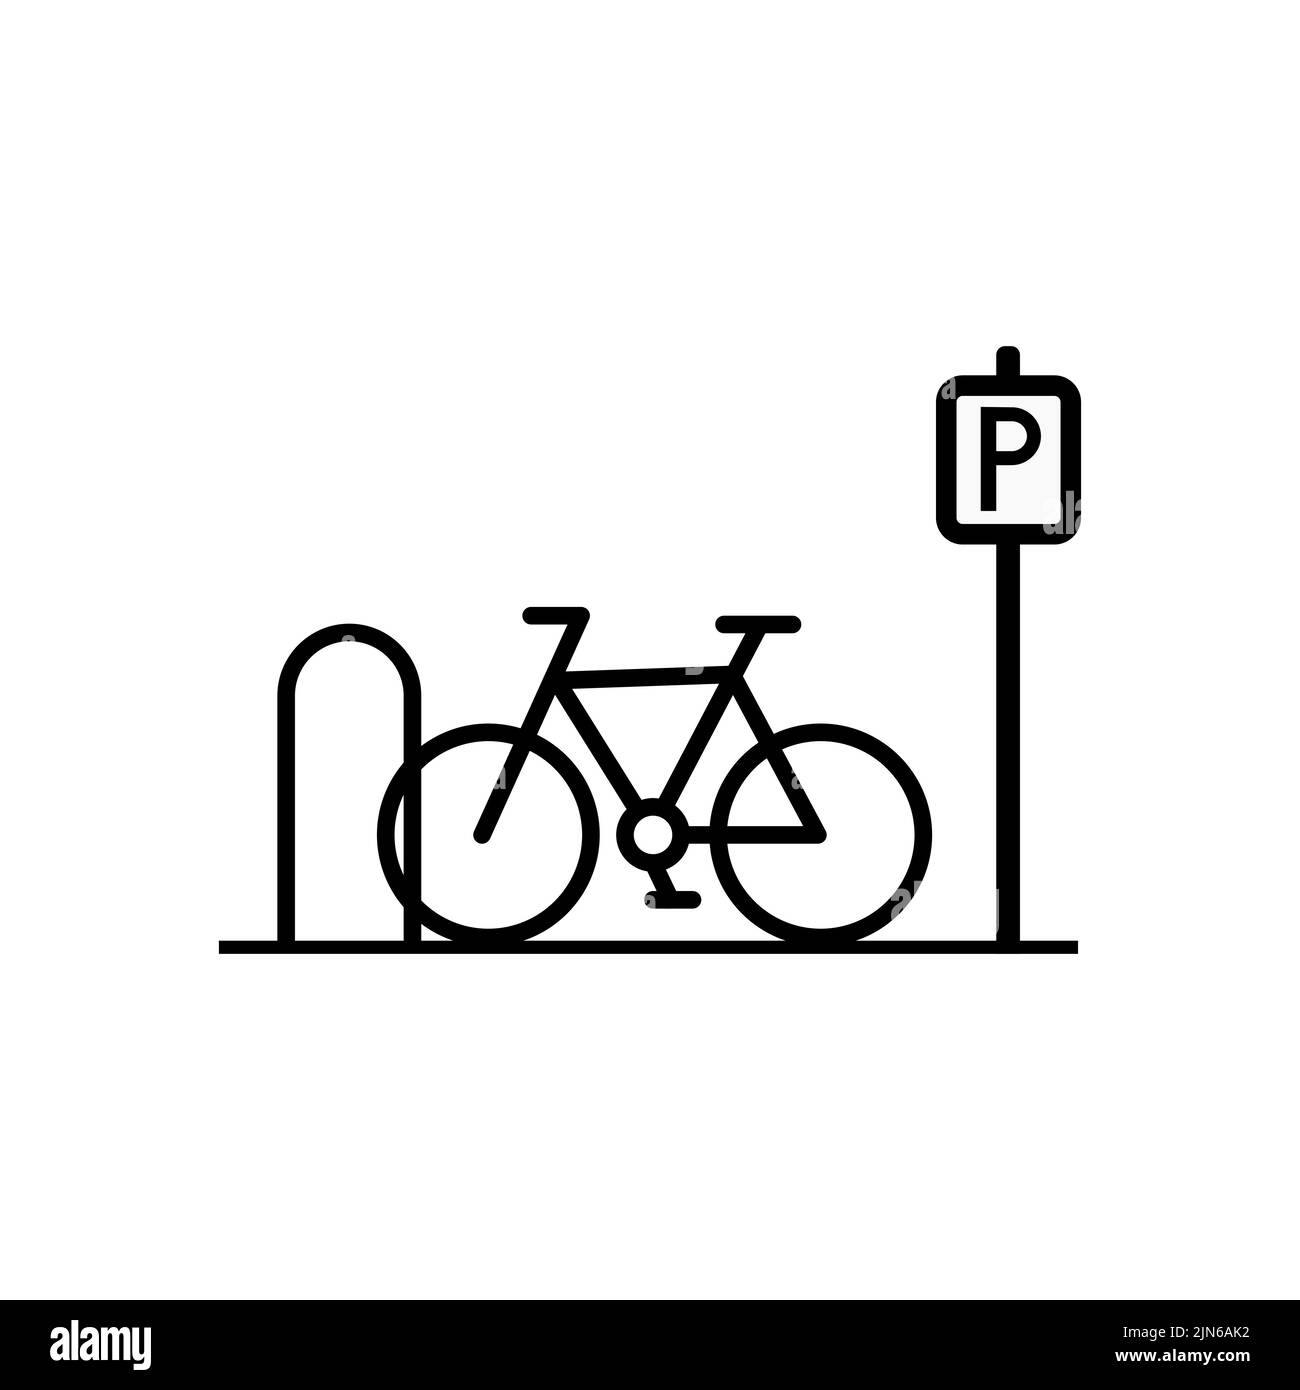 Bicycle Parking line Icon. parking space for bicycles. editable stroke Stock Vector